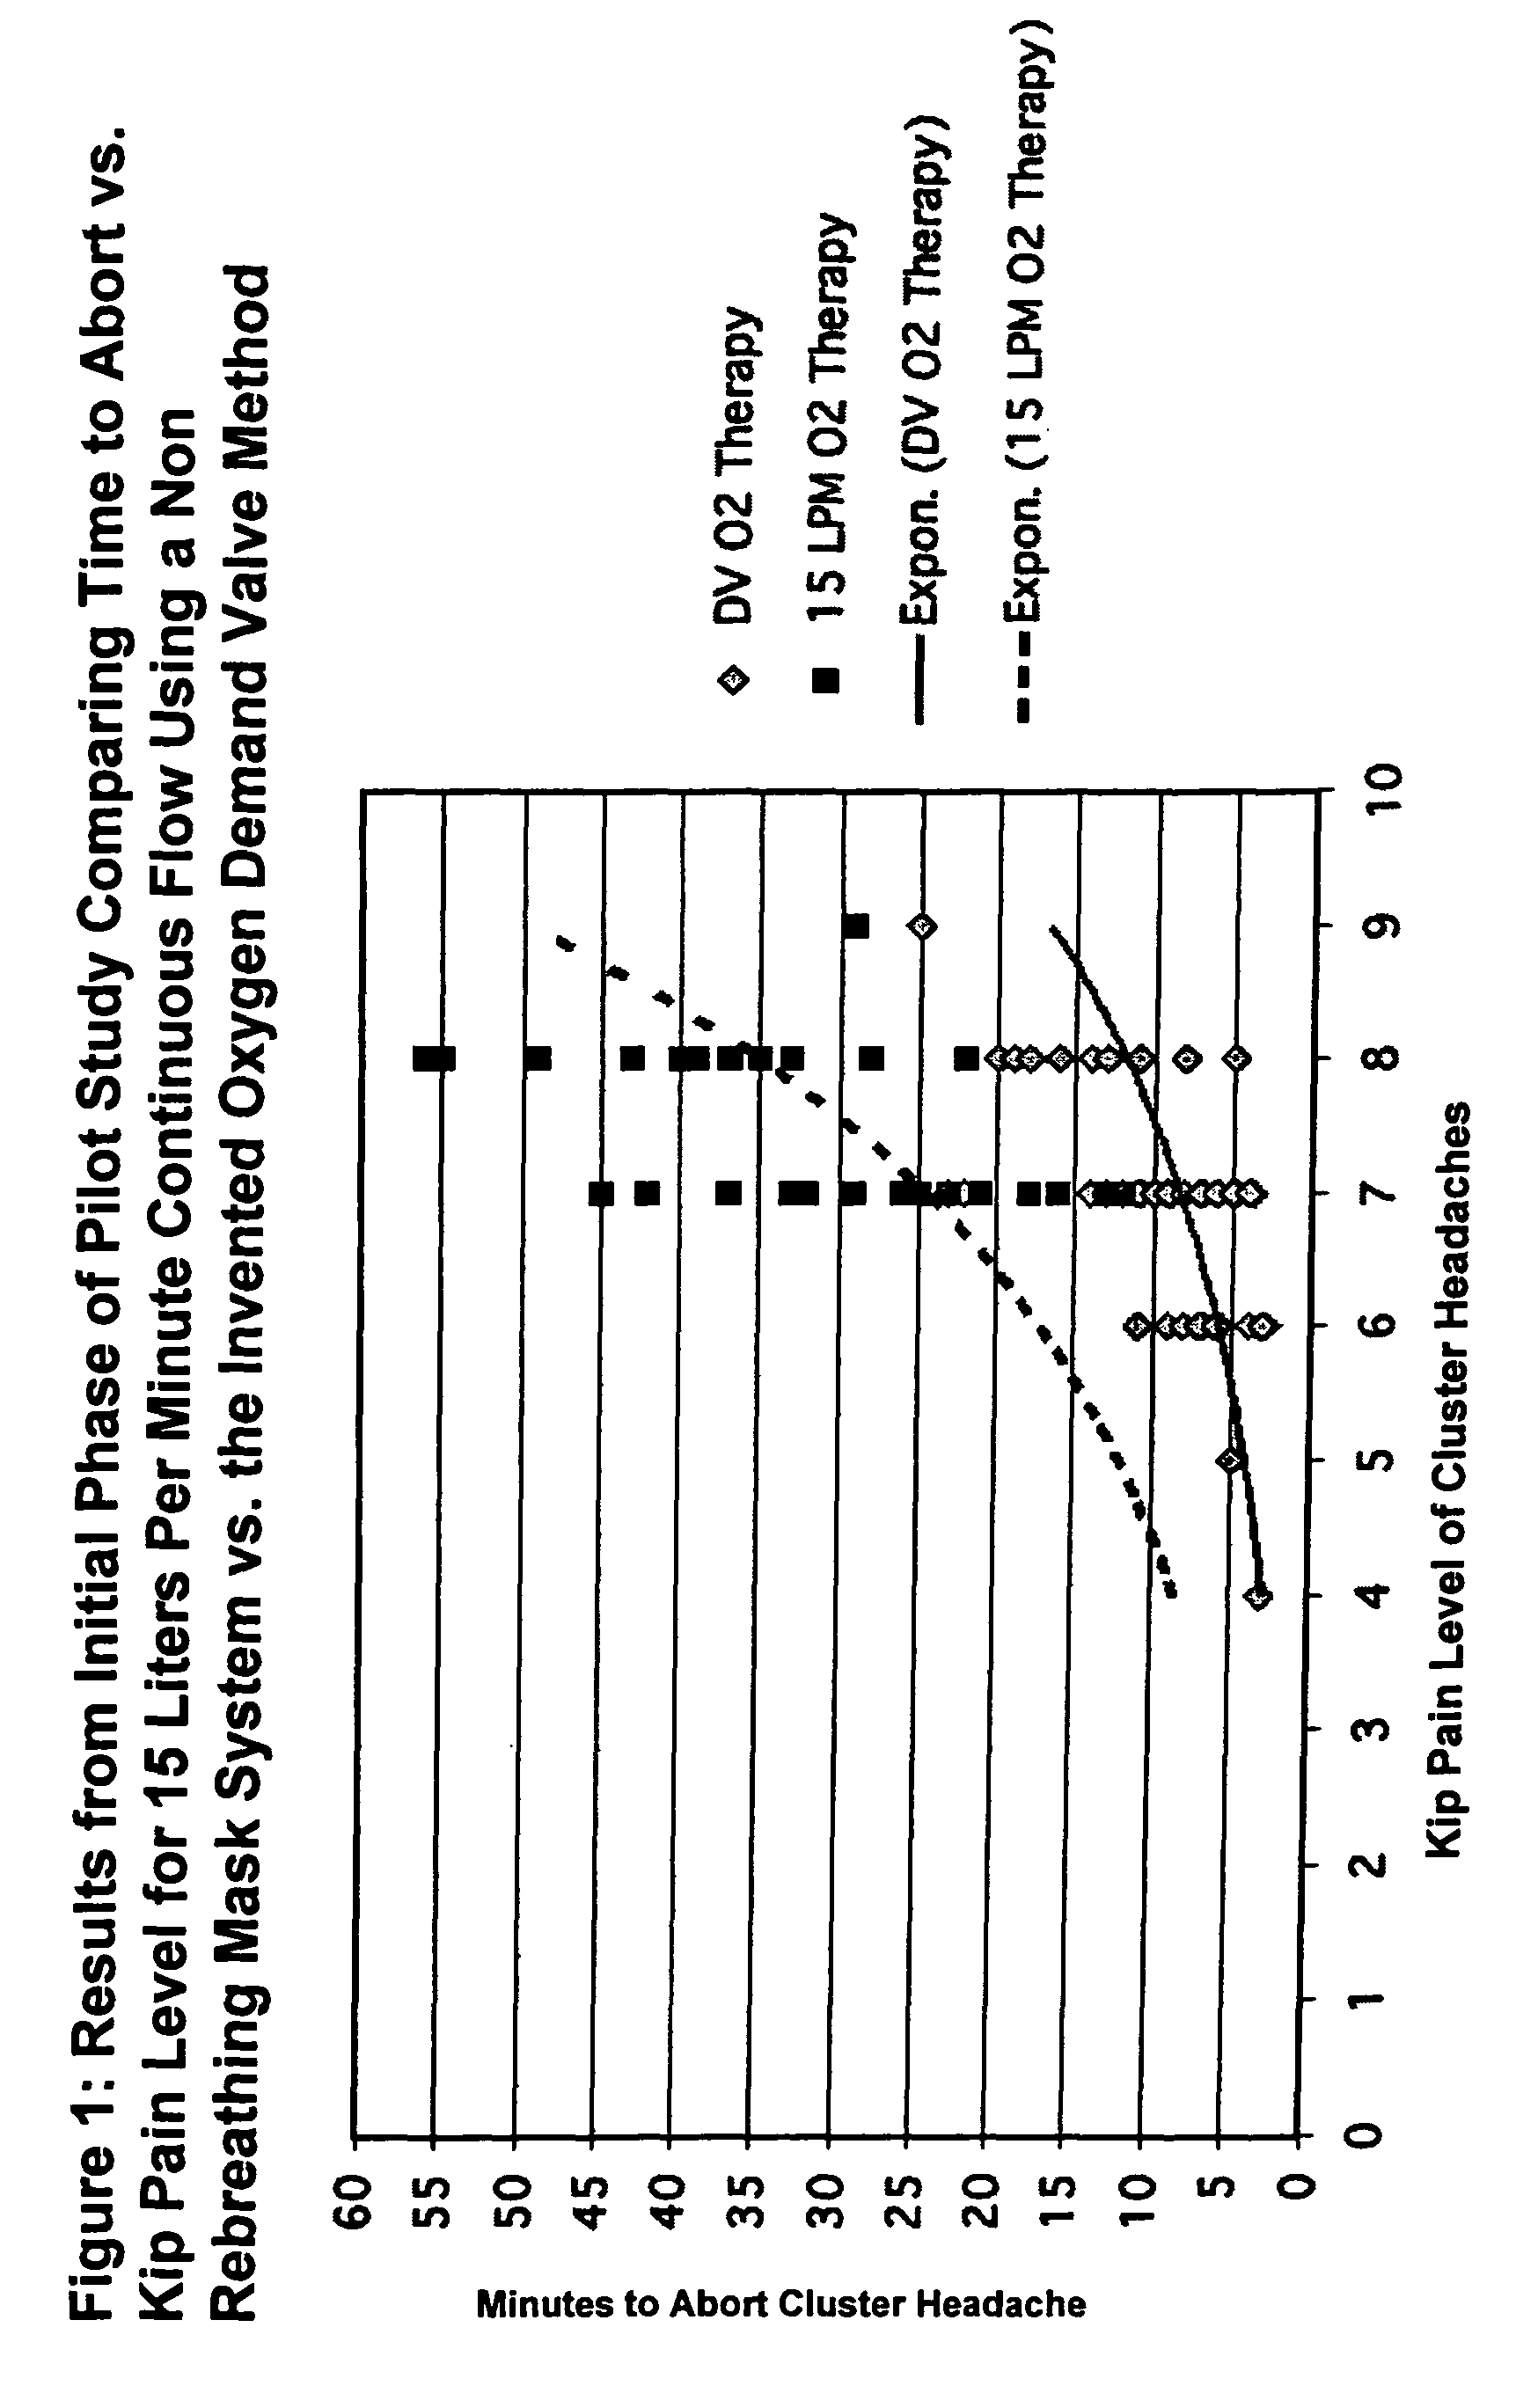 Method of demand valve oxygen therapy for rapid abort of cluster headache